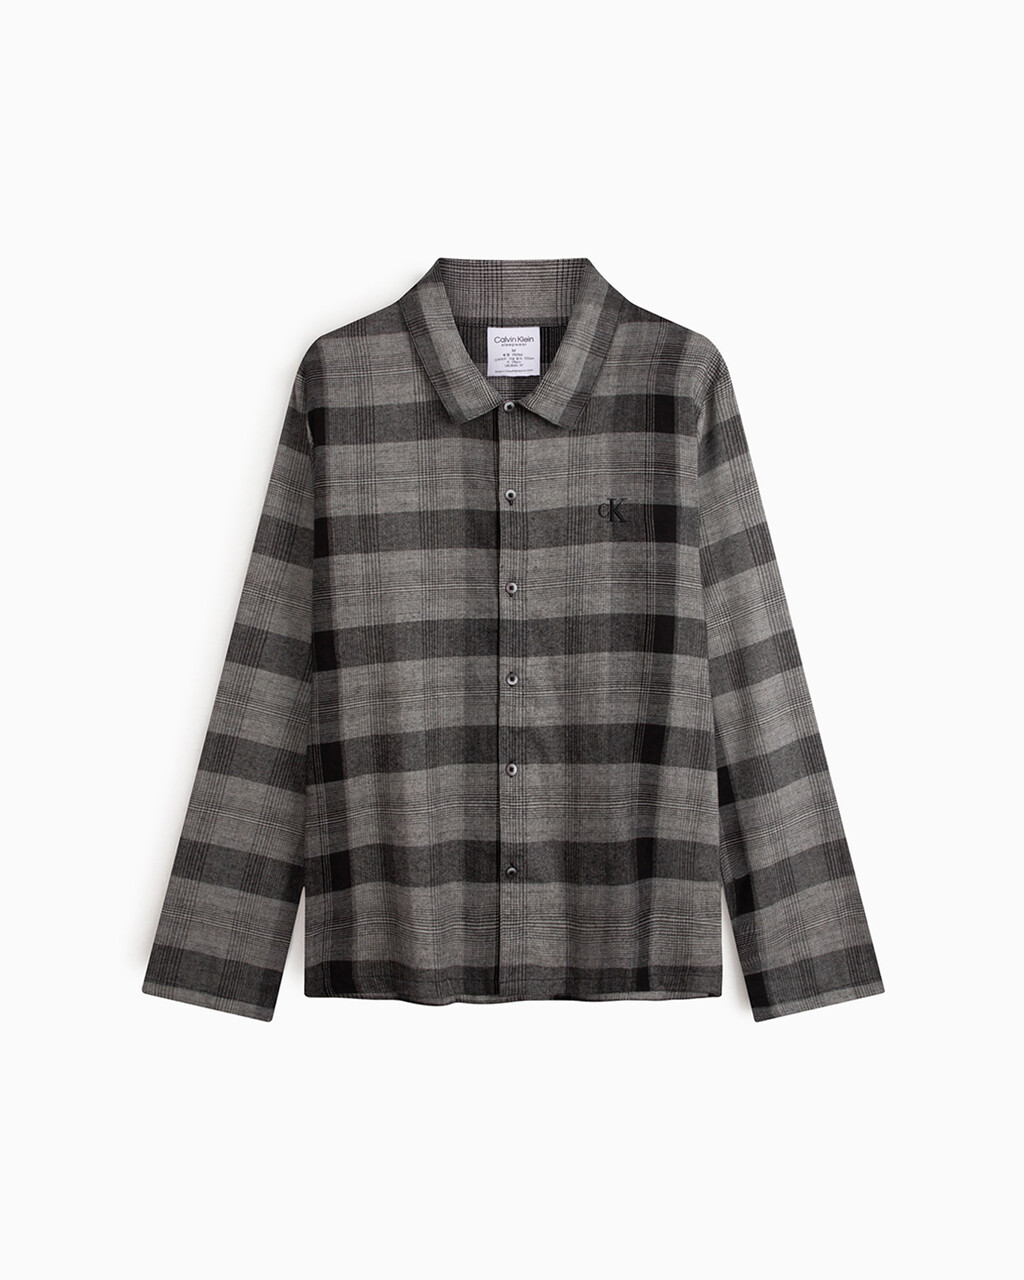 Long Sleeve Button Down Shirt, GRADIENT CHECK_GREY HEATHER, hi-res